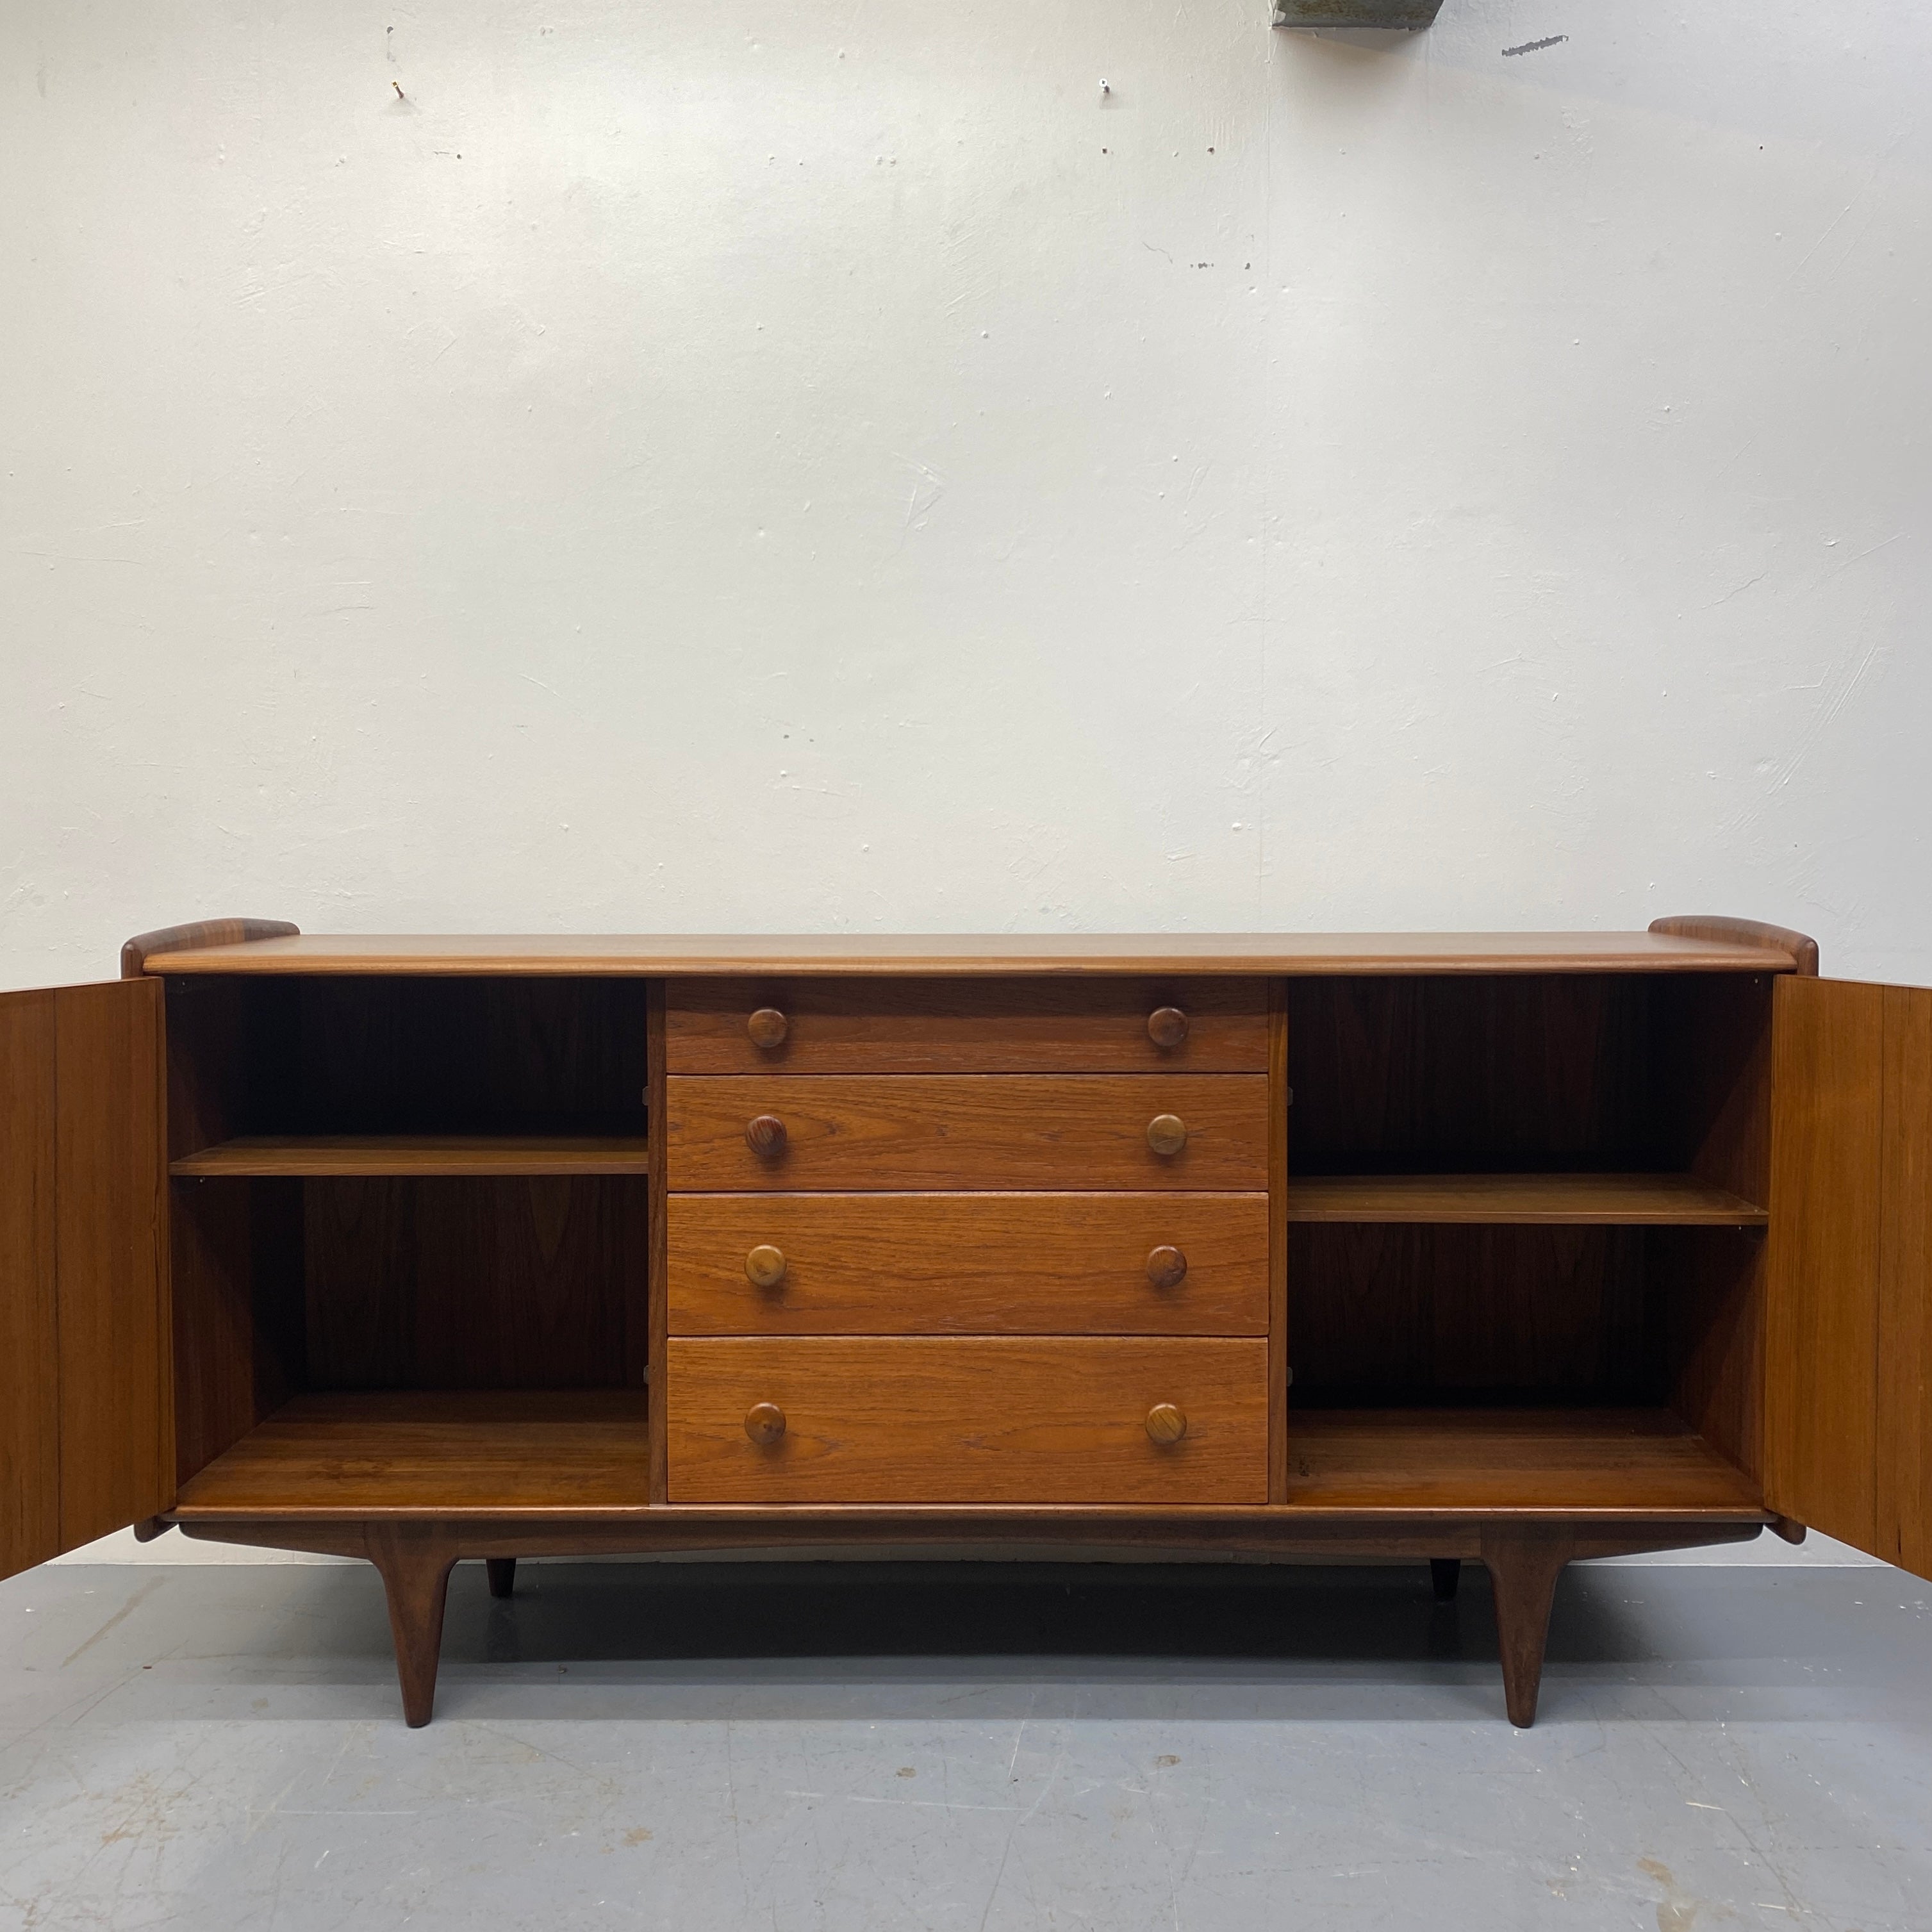 Inside Shelving Afromosia A Younger Sideboard